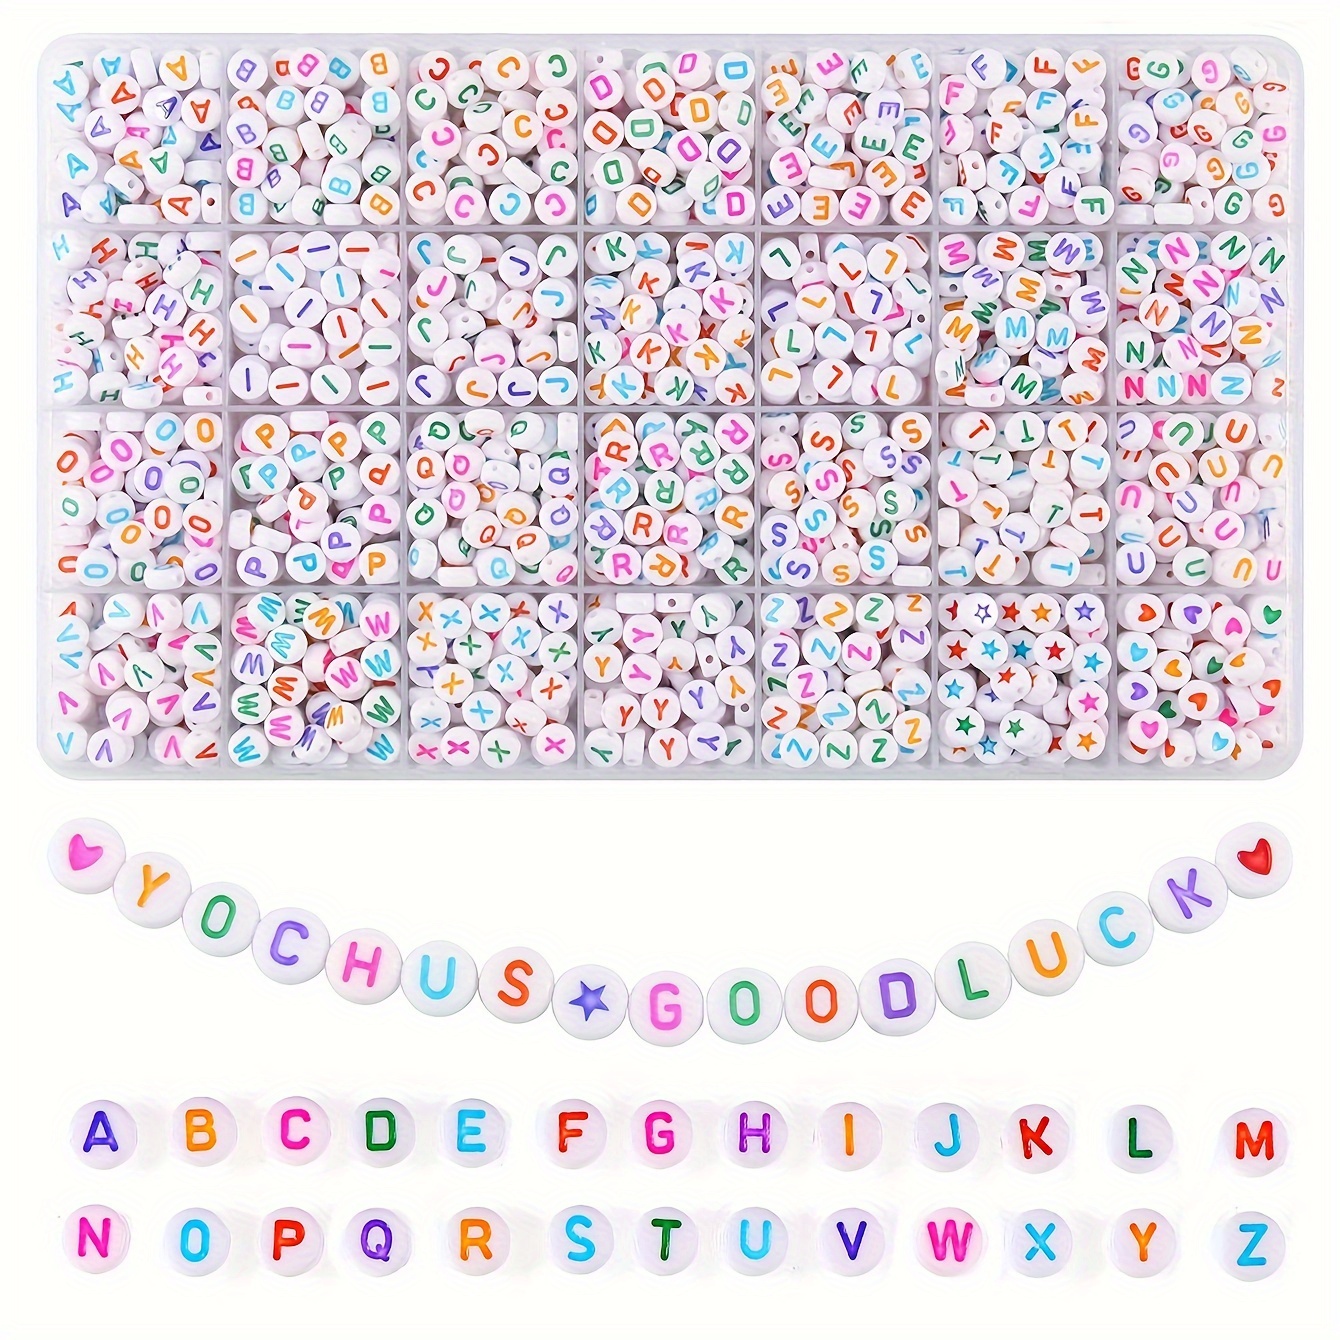 

840pcs Colorful Acrylic Alphabet Beads 4x7mm - A-z Letter & Heart Patterns For Diy Jewelry And Bracelet Crafting Spacer Beads For Jewelry Making Letter Beads For Bracelets